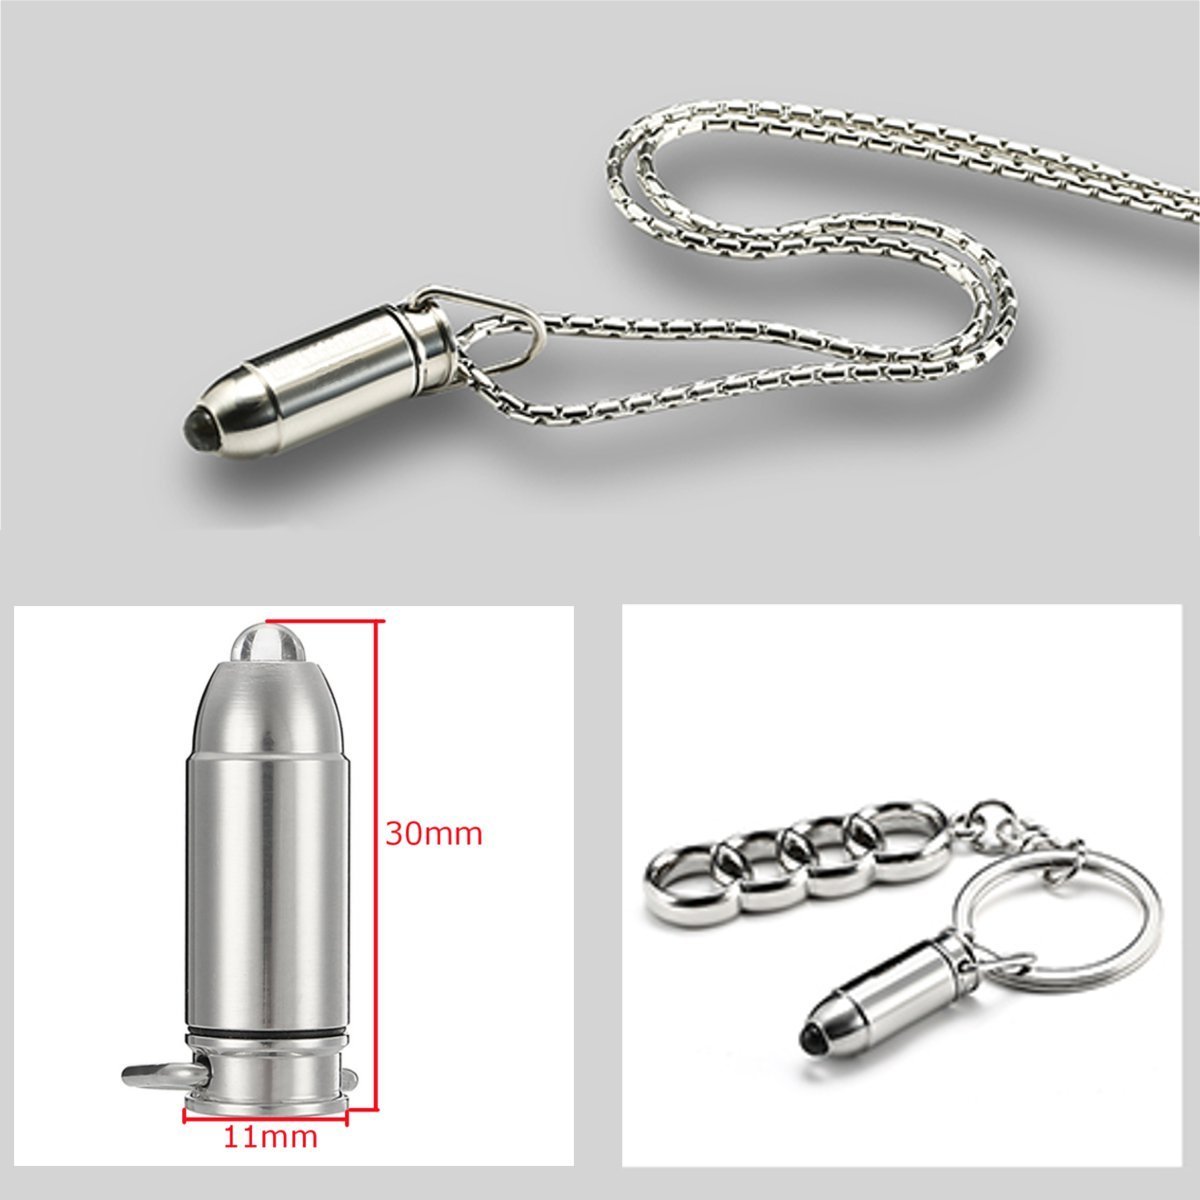 Mini-LED-Keychain-Flashlight-45lm-Portable-Pocket-Tactical-EDC-Torch-Camping-Hunting-1193880-2